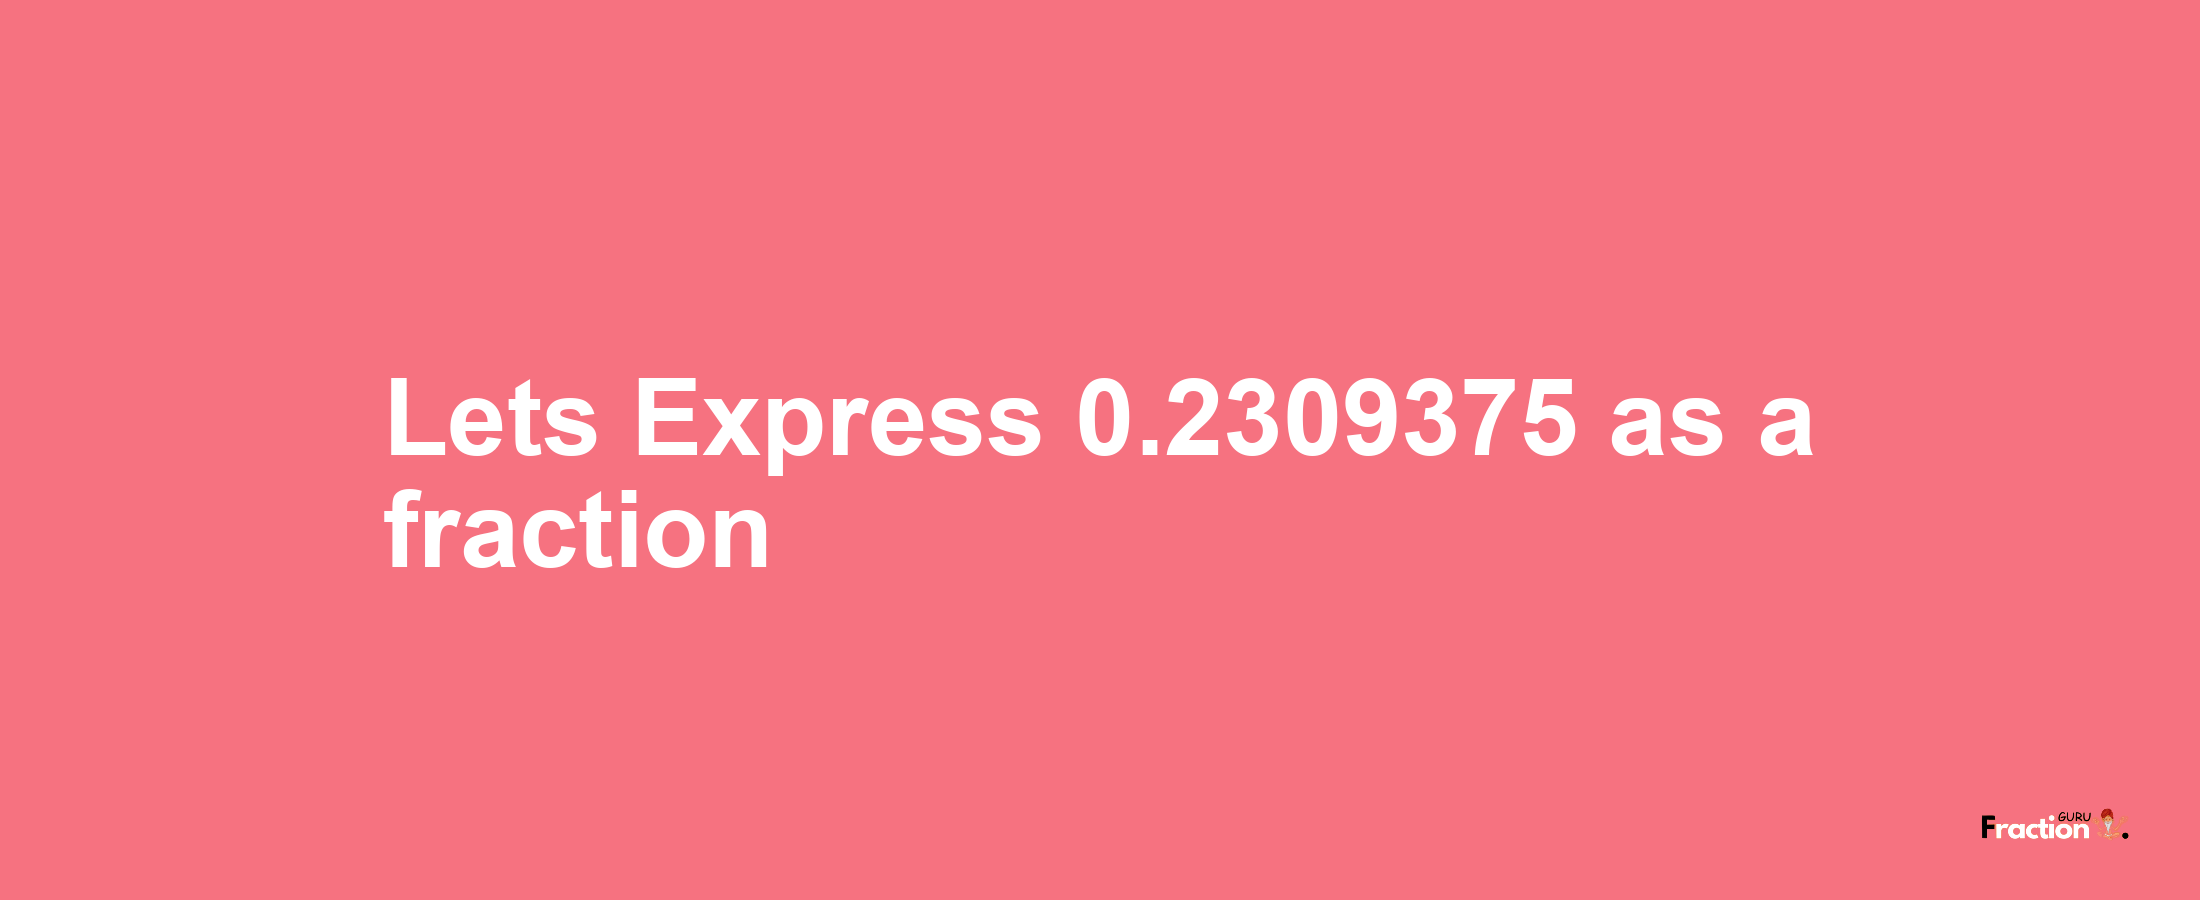 Lets Express 0.2309375 as afraction